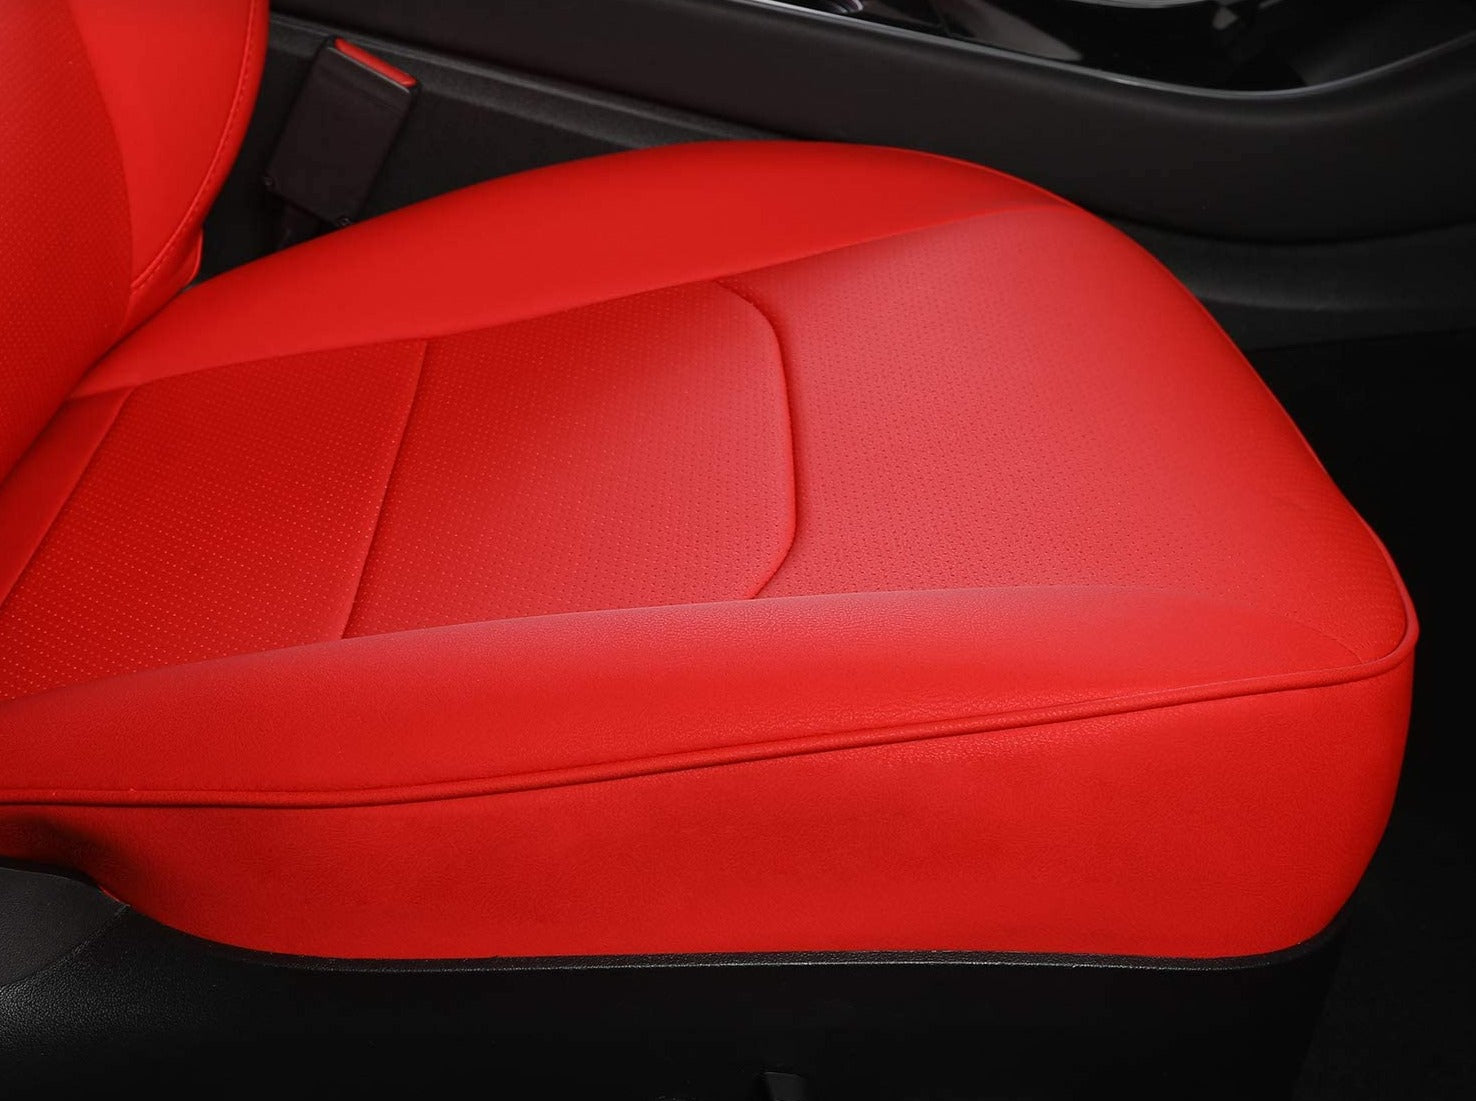 Model Y: PU Leather Full Seat Cover (12 PCs)